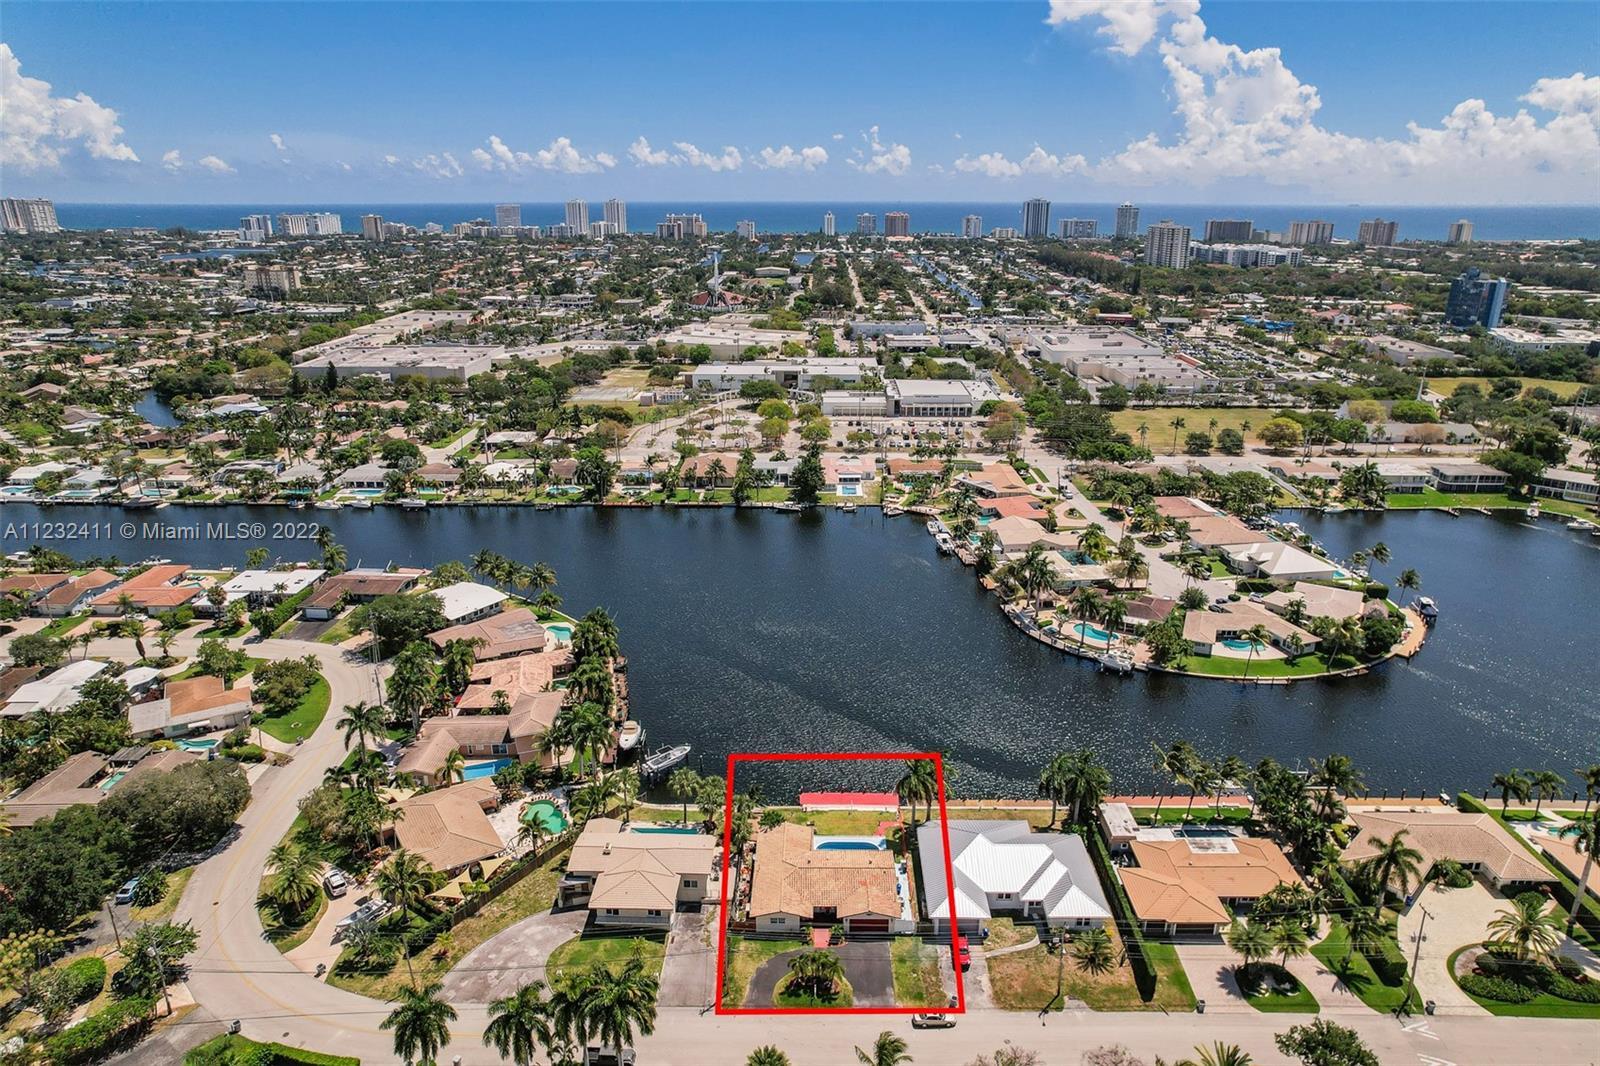 Incredible Opportunity! Boaters Dream, Waterfront home with 1 fixed bridge to deep water ocean access in sought after Cypress lake! Put your own personal touches into your new waterfront dream home! Beautiful Million Dollar waterfront lot with Extraordinary views! 75 Ft of frontage! Minutes to the beach, down the street from US1, restaurants, shopping, and all that Pompano Beach has to offer! Pompano Beach CRA developments coming right down the street with new retail and development plans for Mcnab St and all of Pompano beach. Huge appreciation potential!